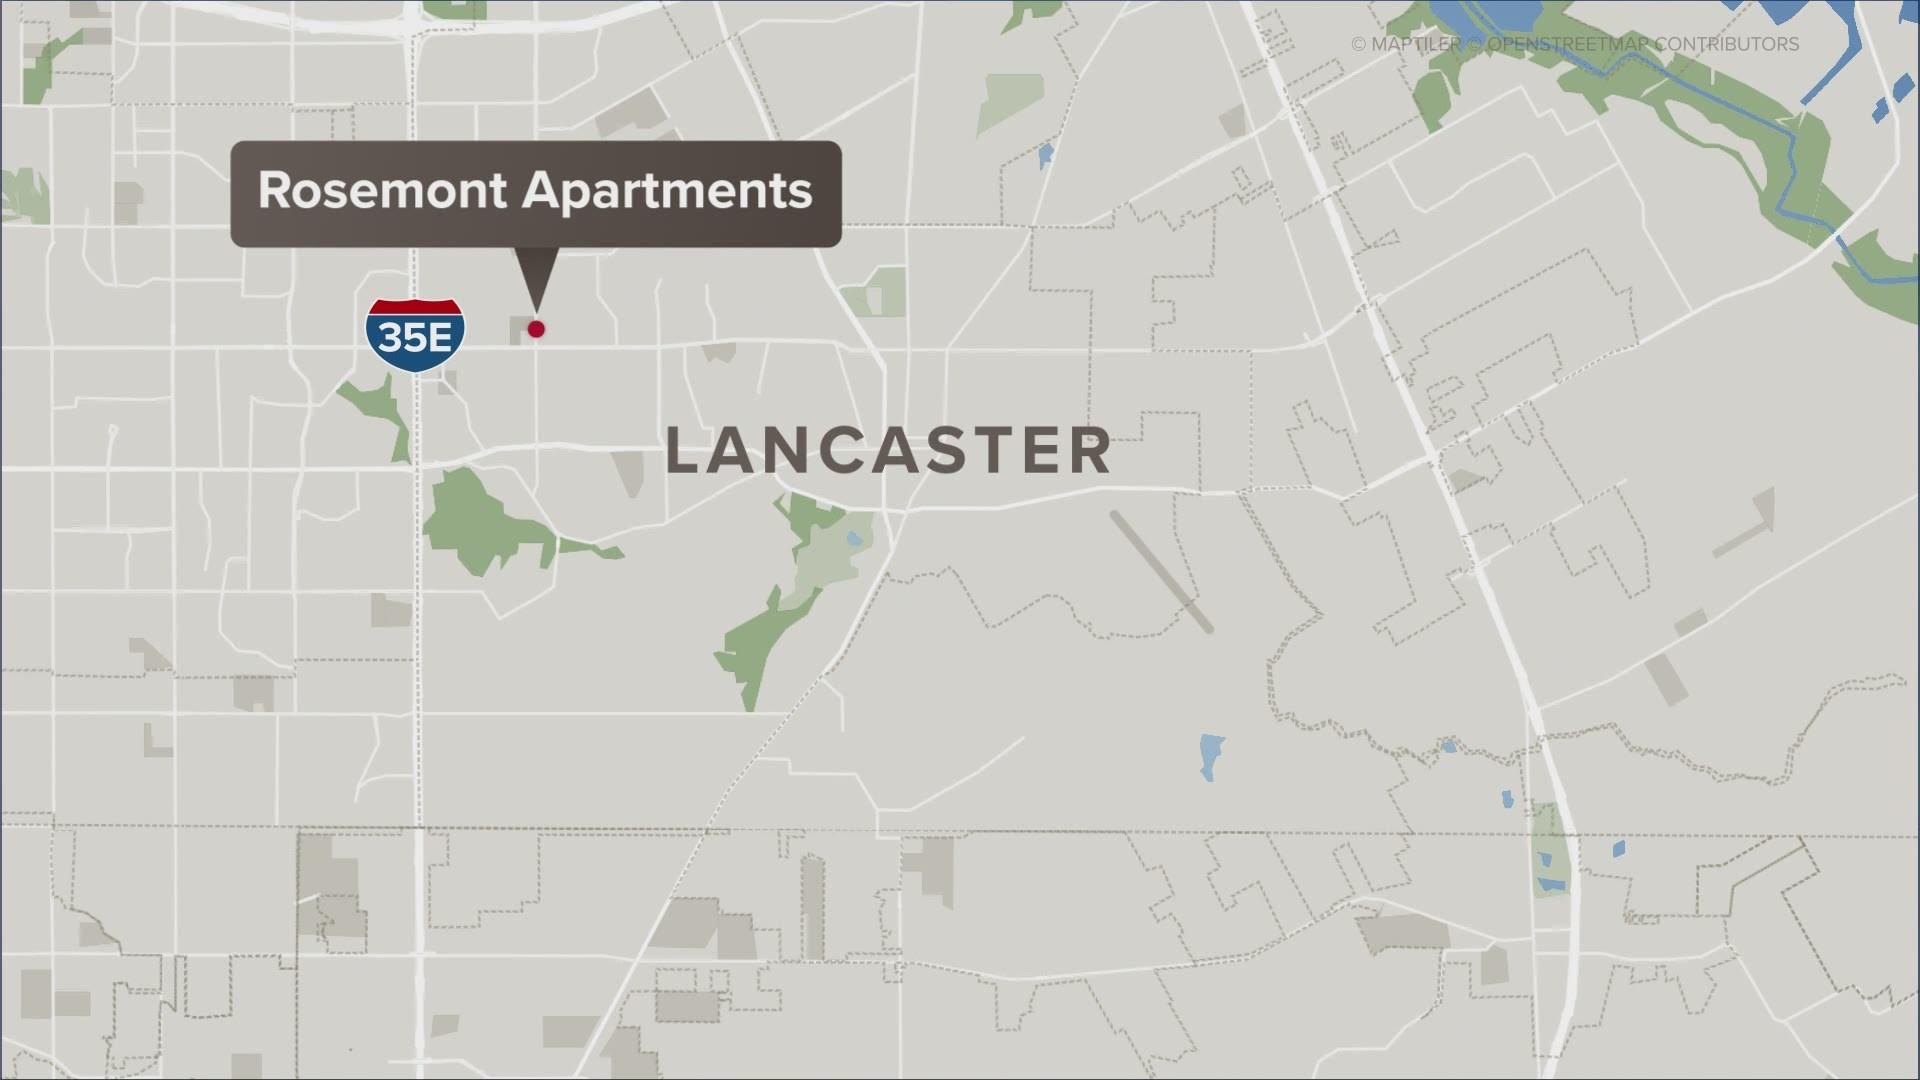 Officers were responding to reports of someone firing a gun at the apartment complex, according to officials.